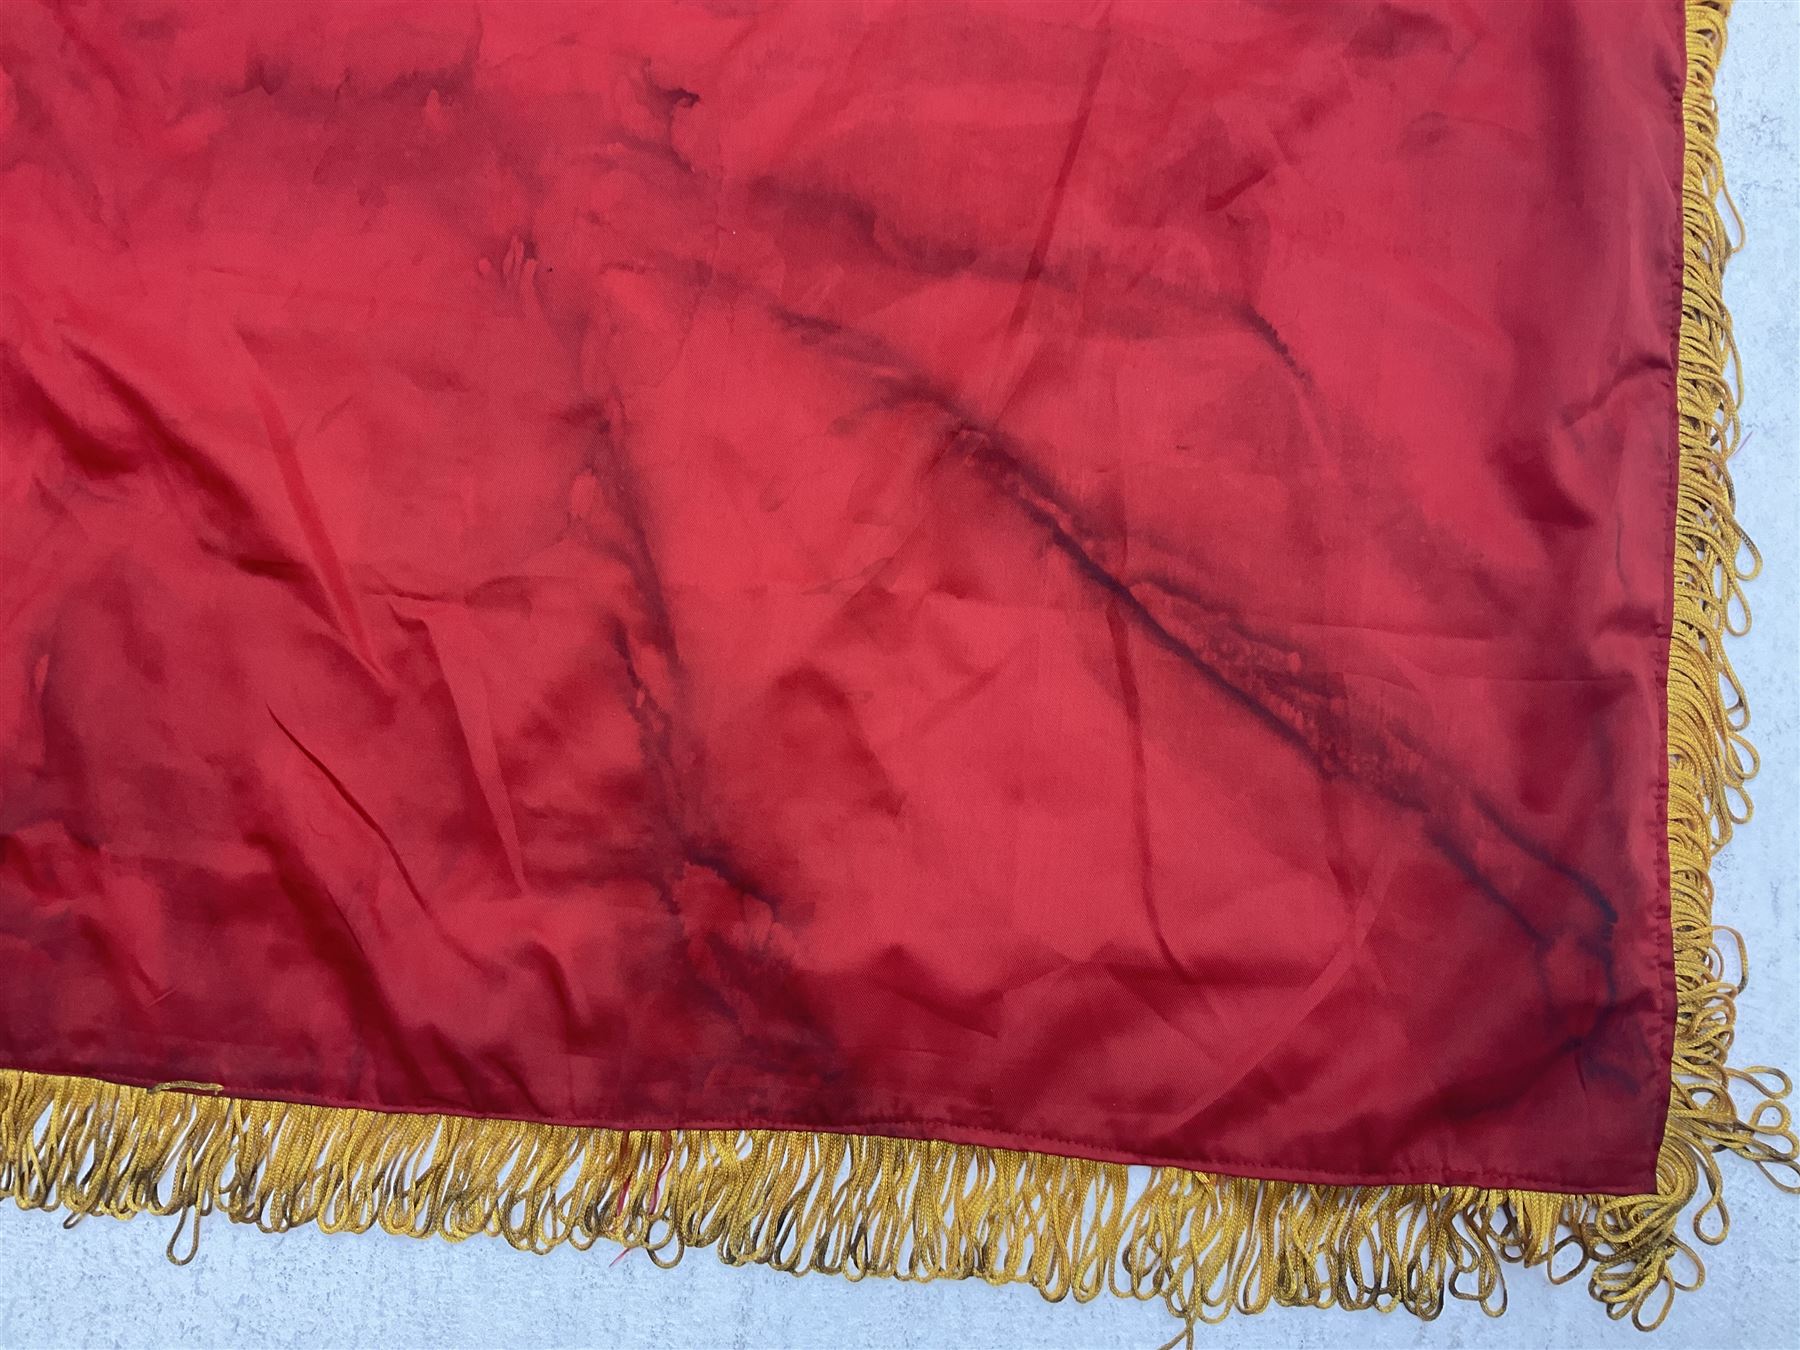 1960s North Vietnam banner embroidered in yellow thread on a red ground - Image 12 of 14